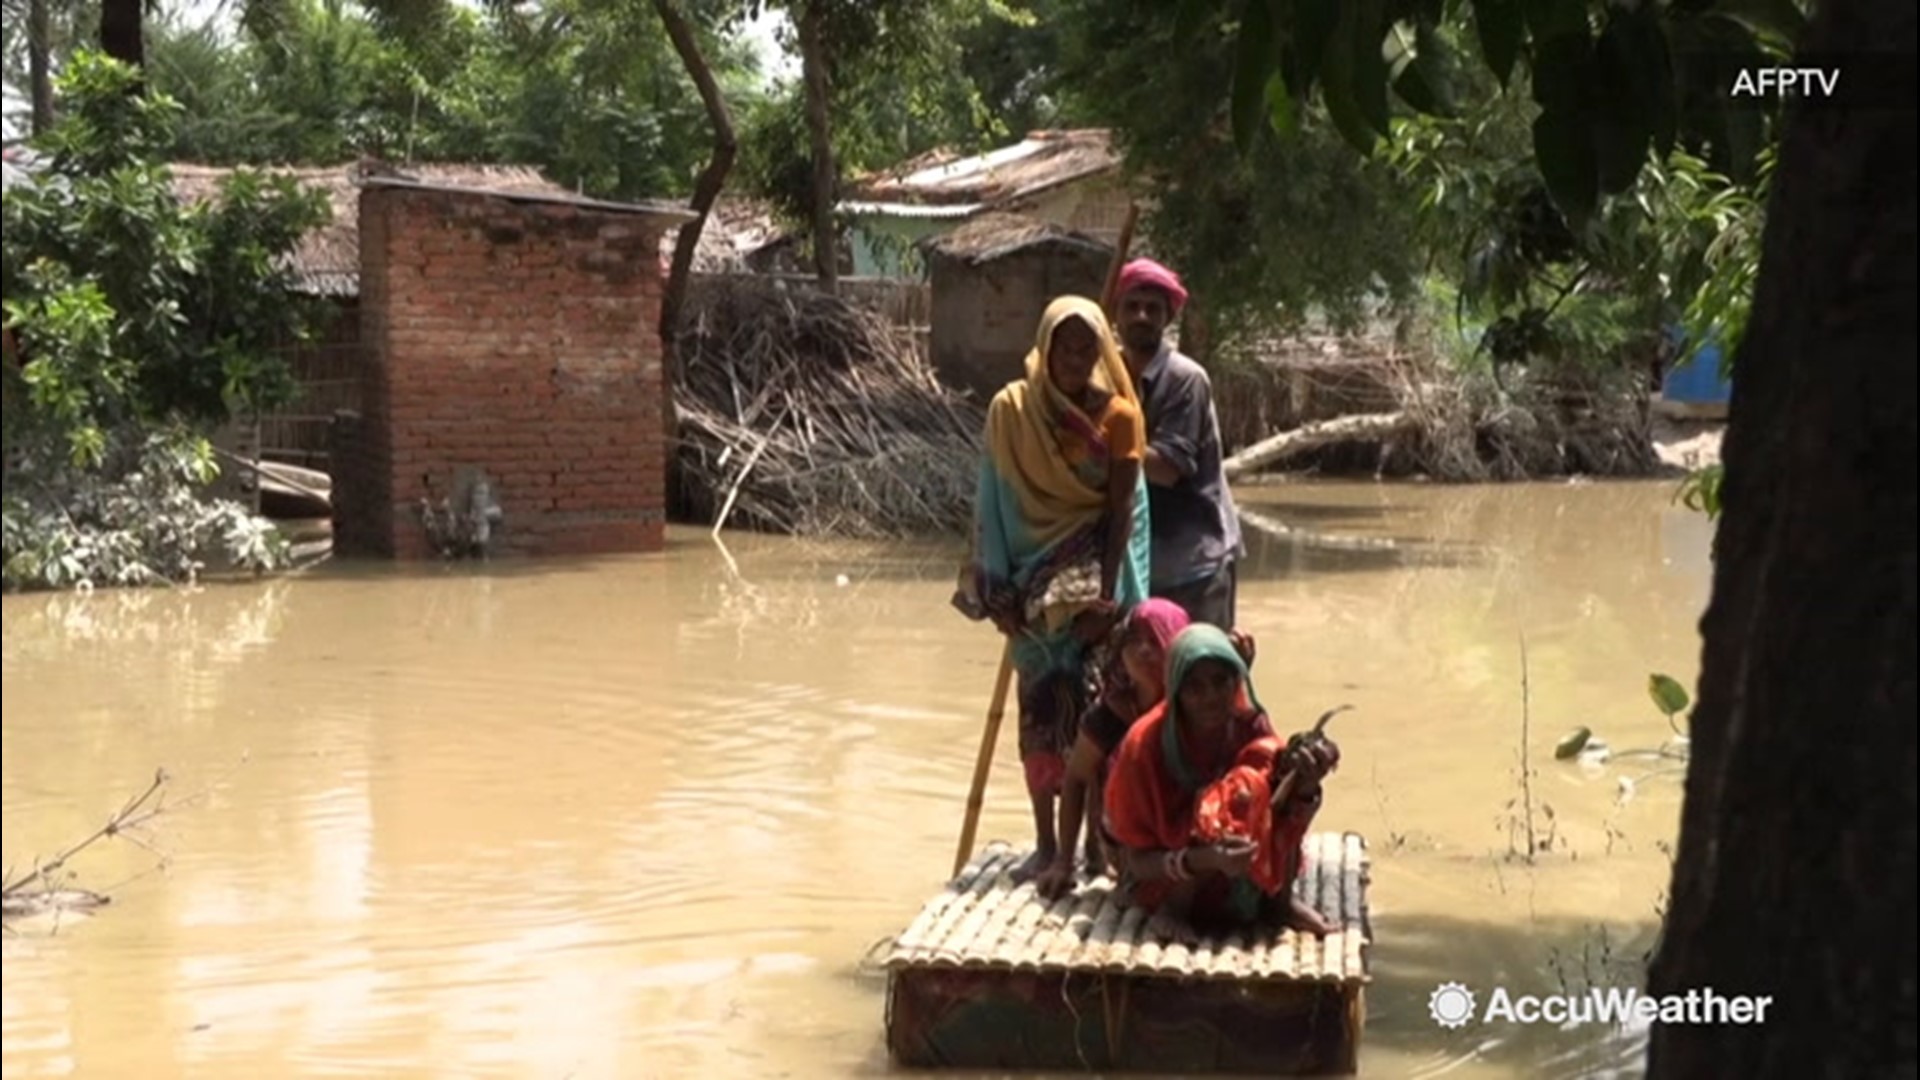 The brown flood water is chest-deep for some residents, following the monsoon that hit the area. This video was shot in Bihar where there was reports of almost 70 people killed as a result of the flooding.  One resident explained how her children keep asking her for food and say they are hungry, but supplies are limited.